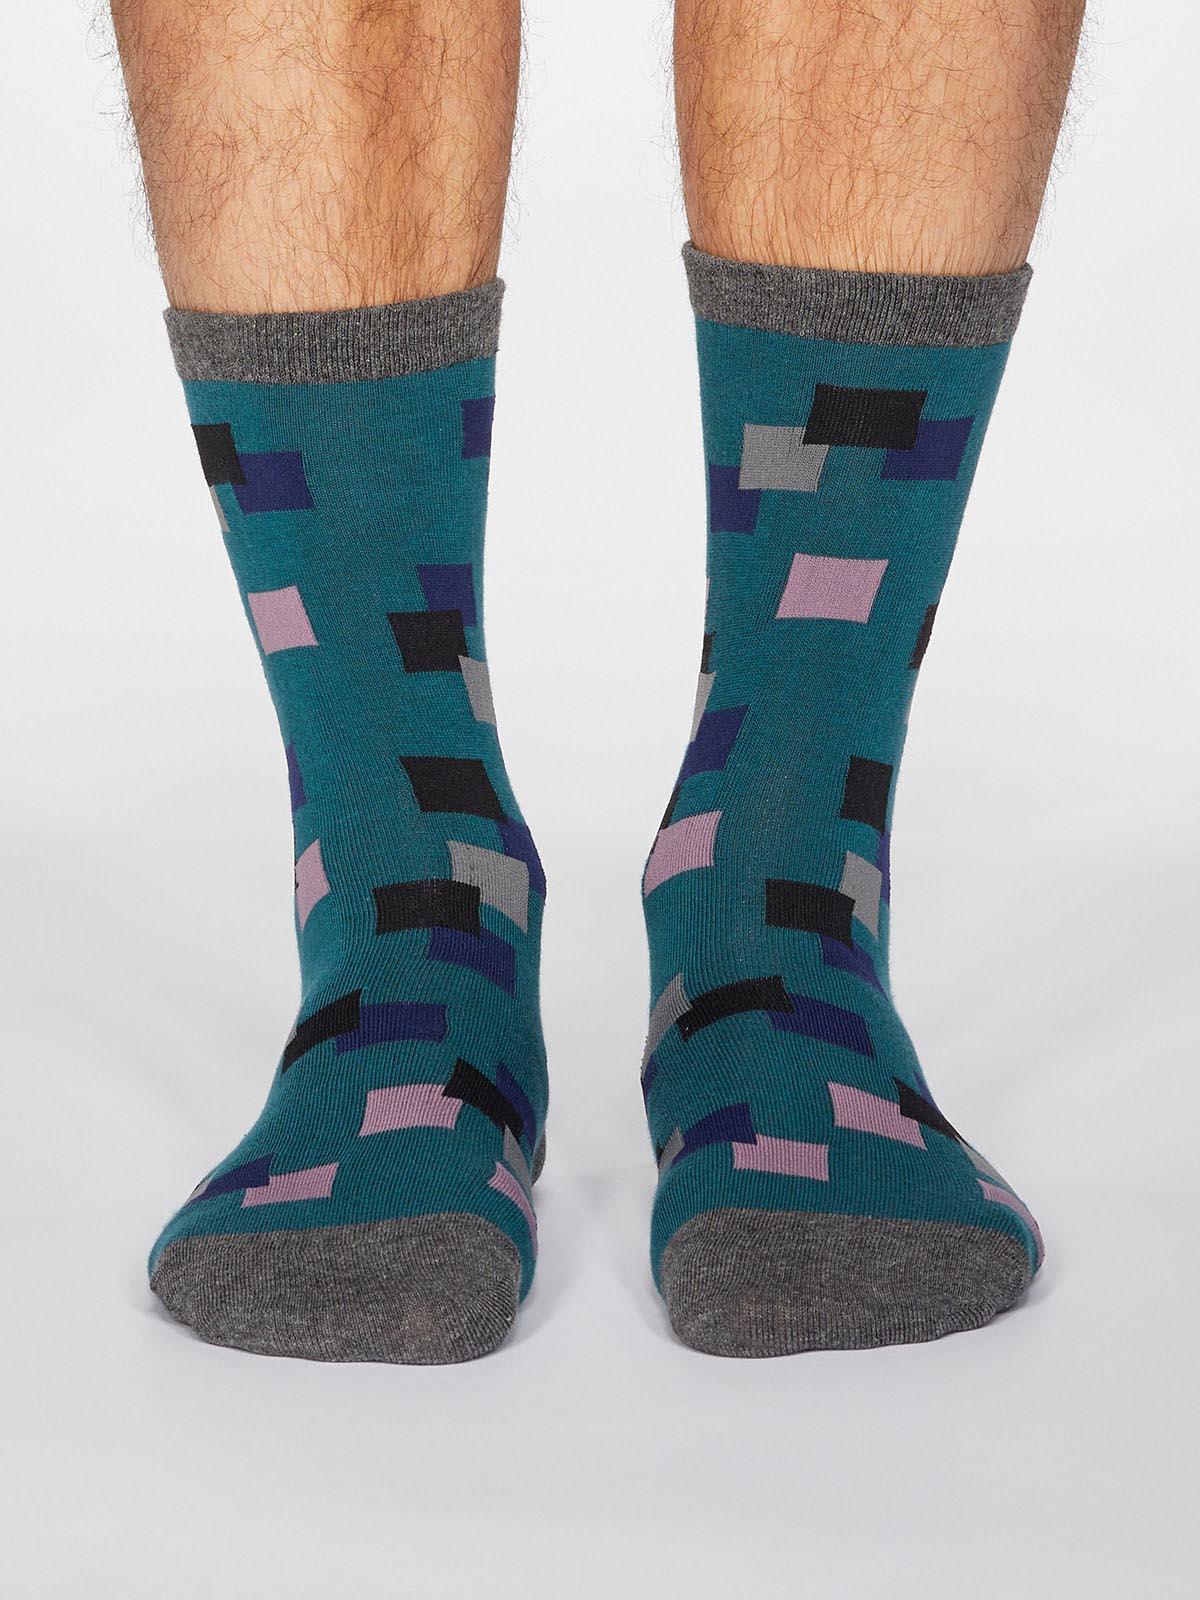 Evan Square Socks - Teal Green - Thought Clothing UK